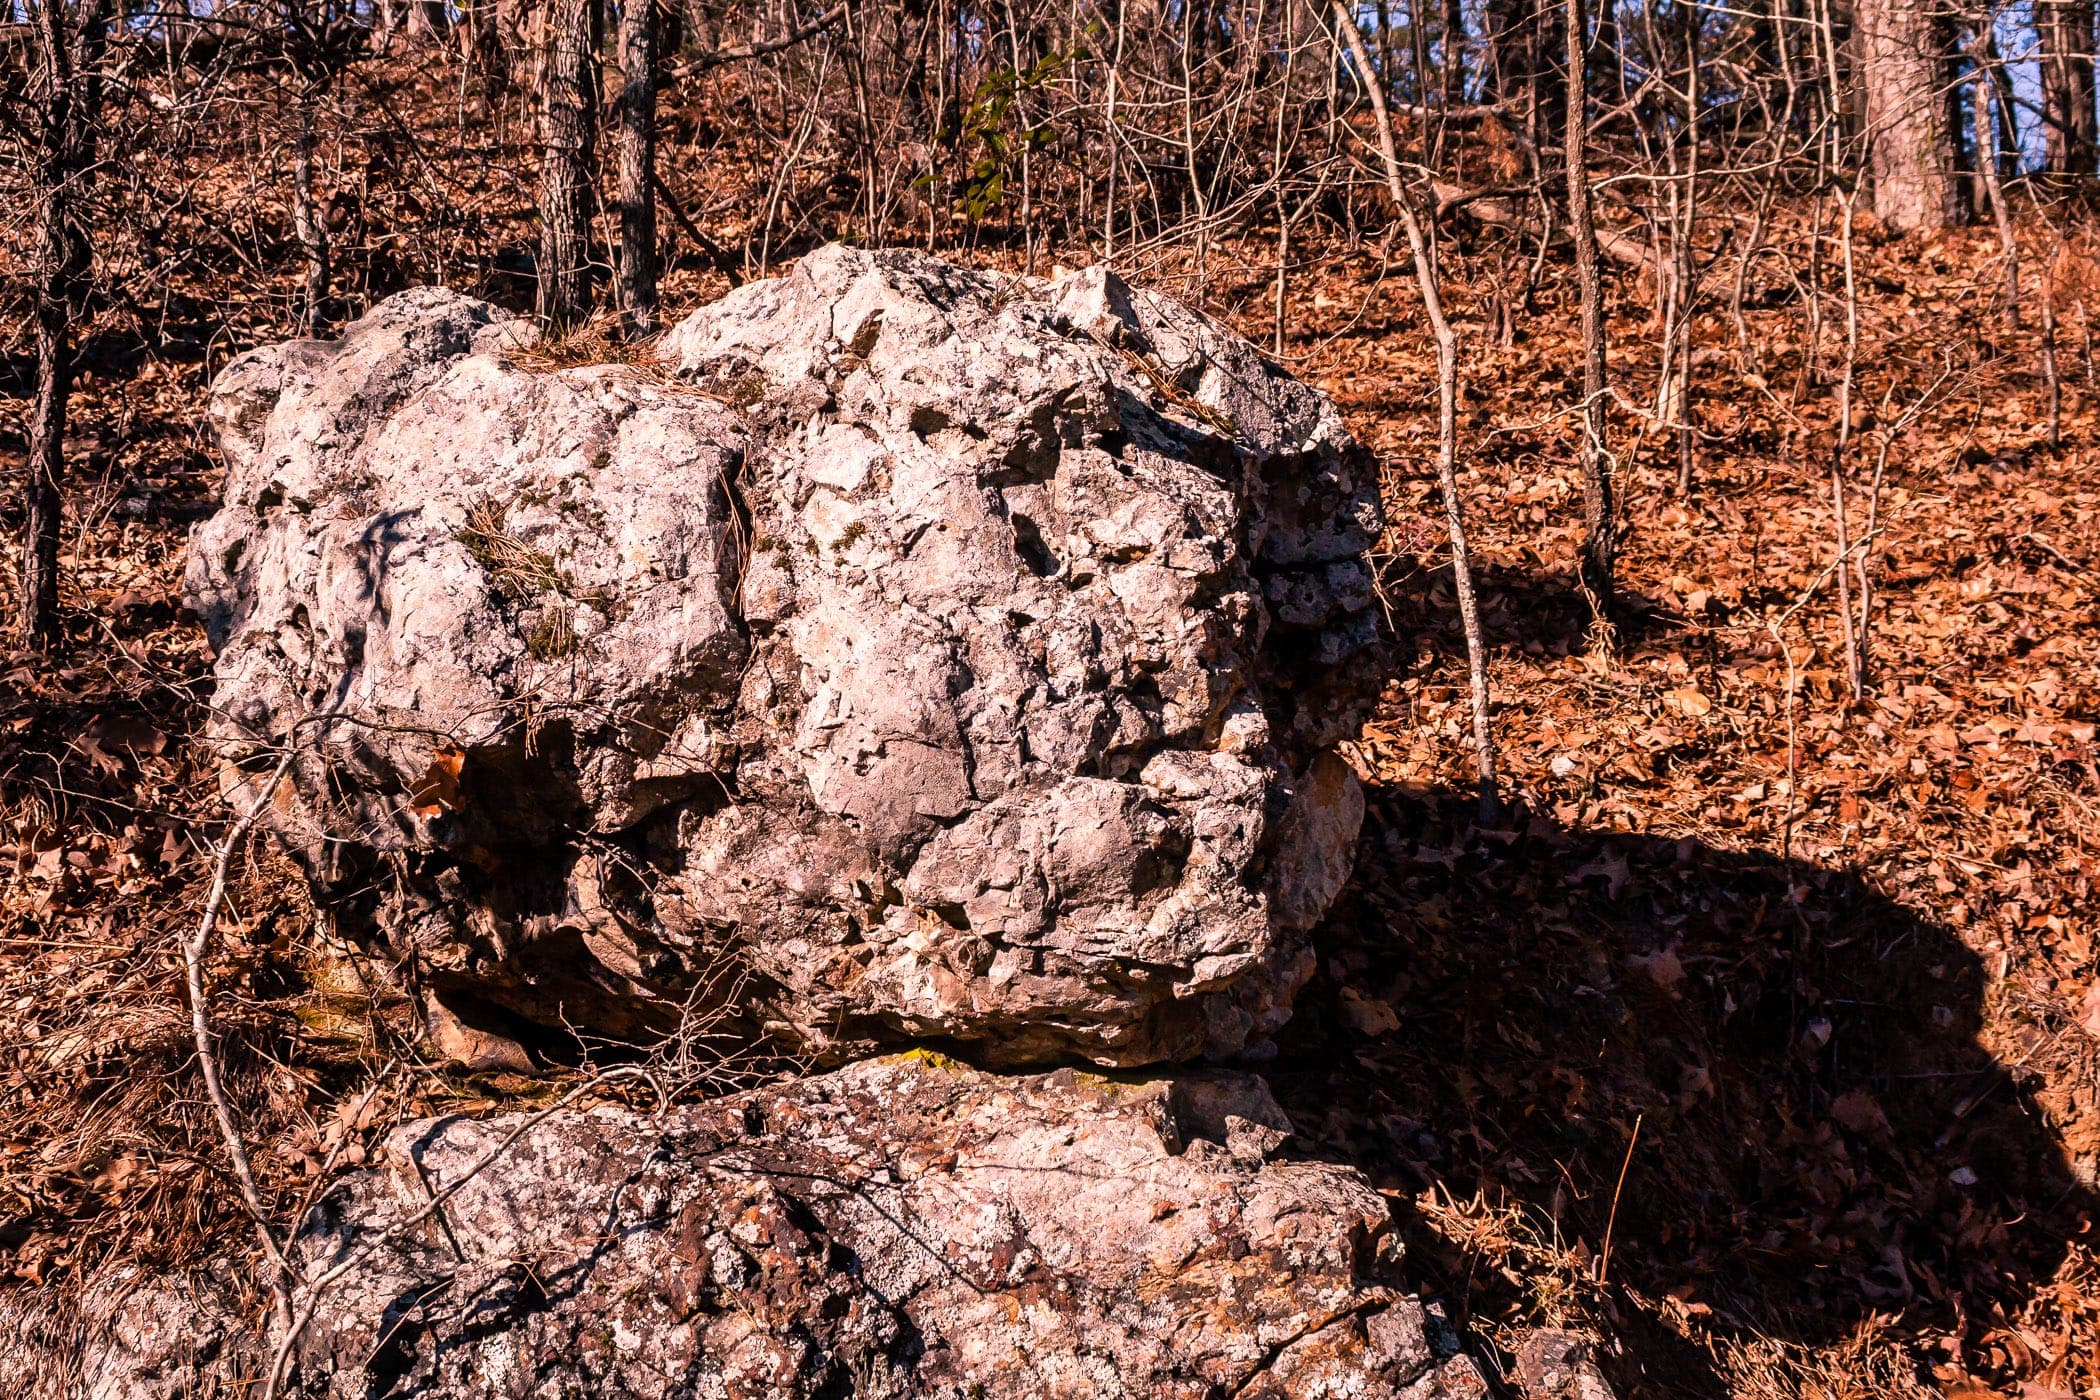 A large rock lies amongst the trees in a Hot Springs, Arkansas, park.